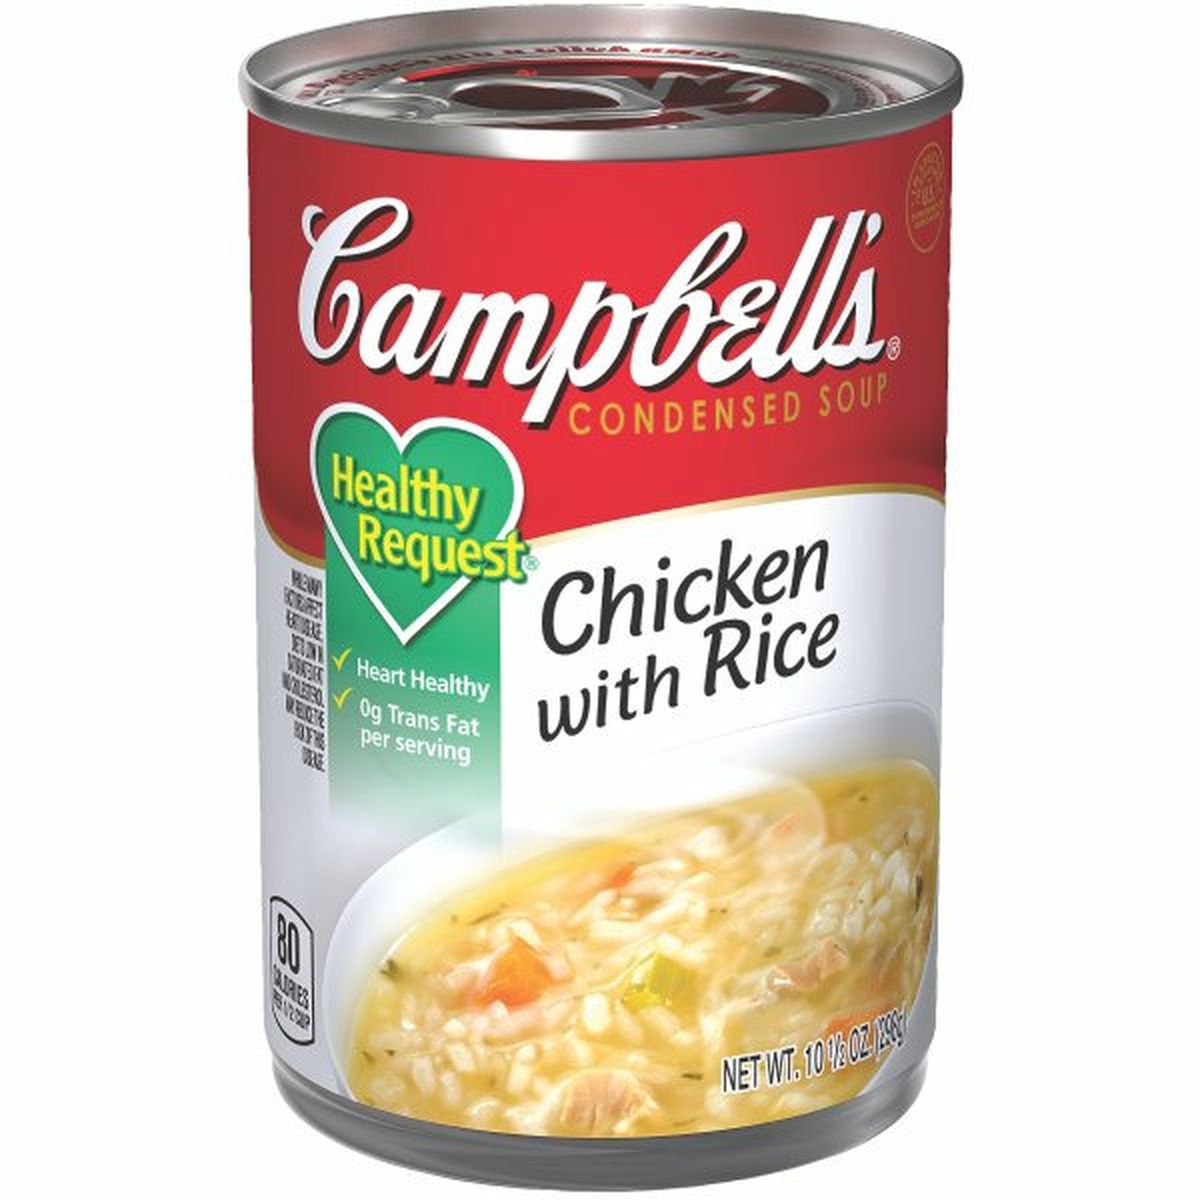 Calories in Campbell'ss Condensed Healthy RequestChicken with Rice Soup